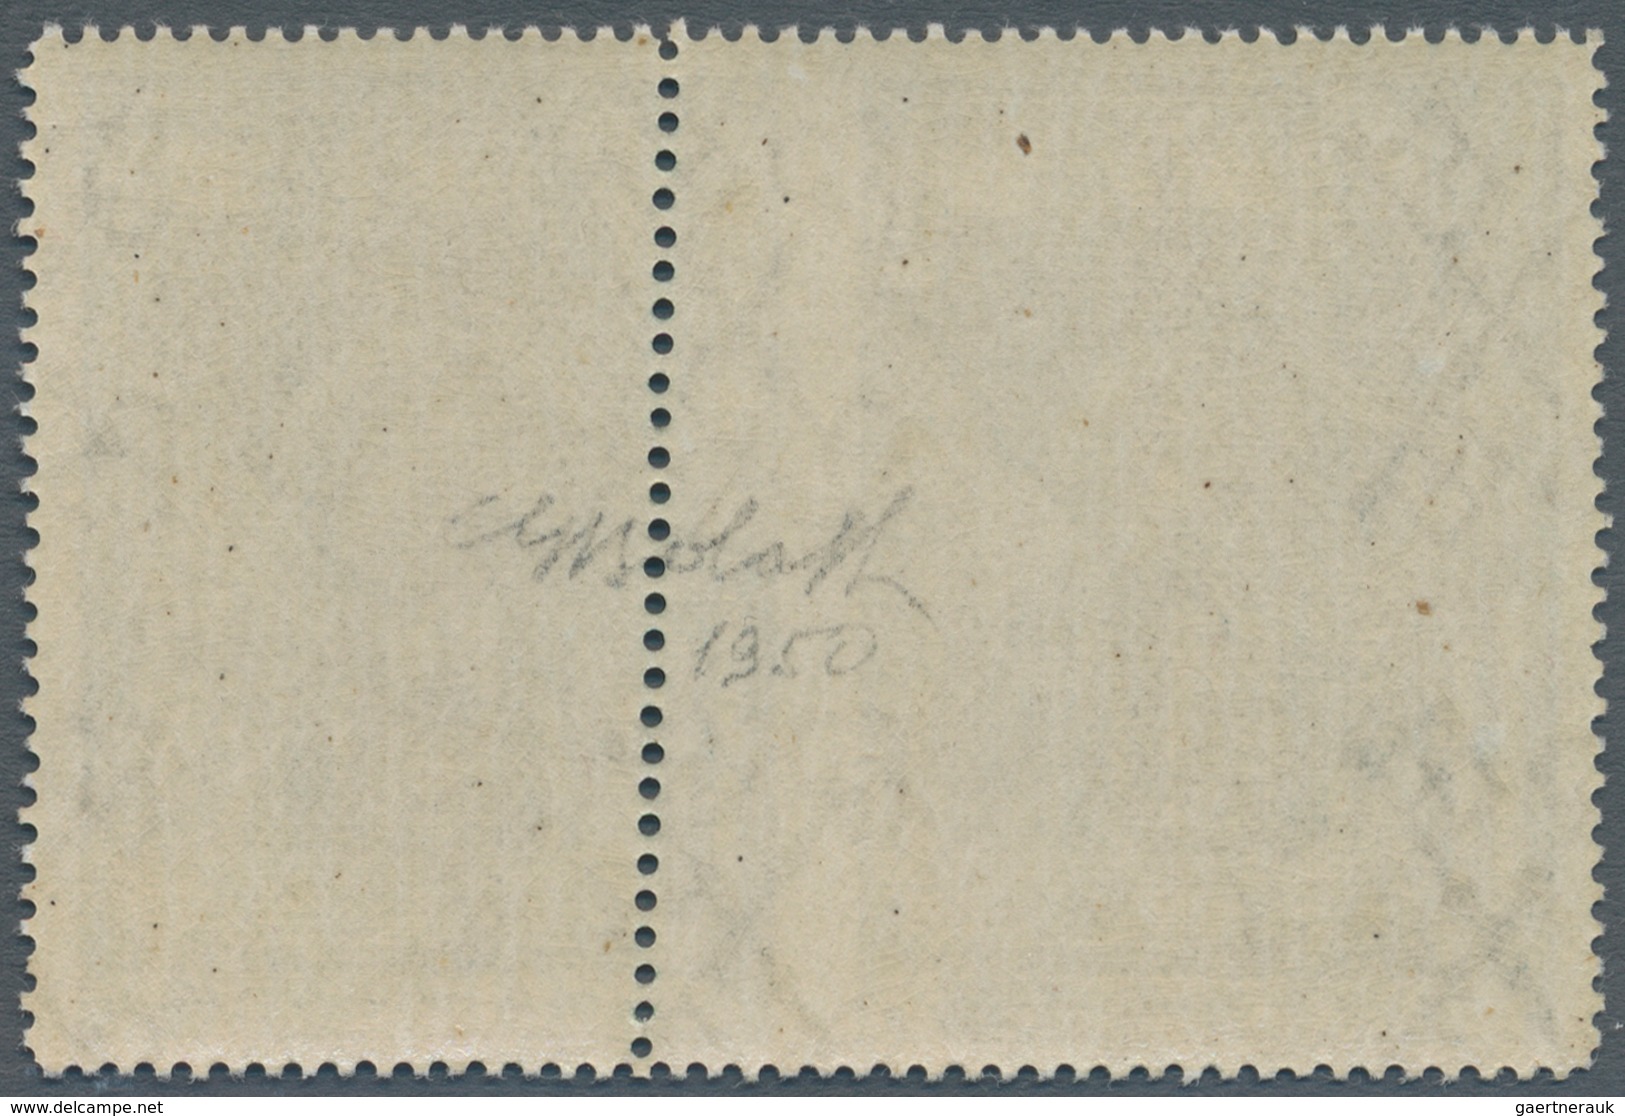 Vatikan: 1949, 8 L Deep Green "basilicas", Horizontal Pair, Vertical Perforation In The Center Stron - Unused Stamps